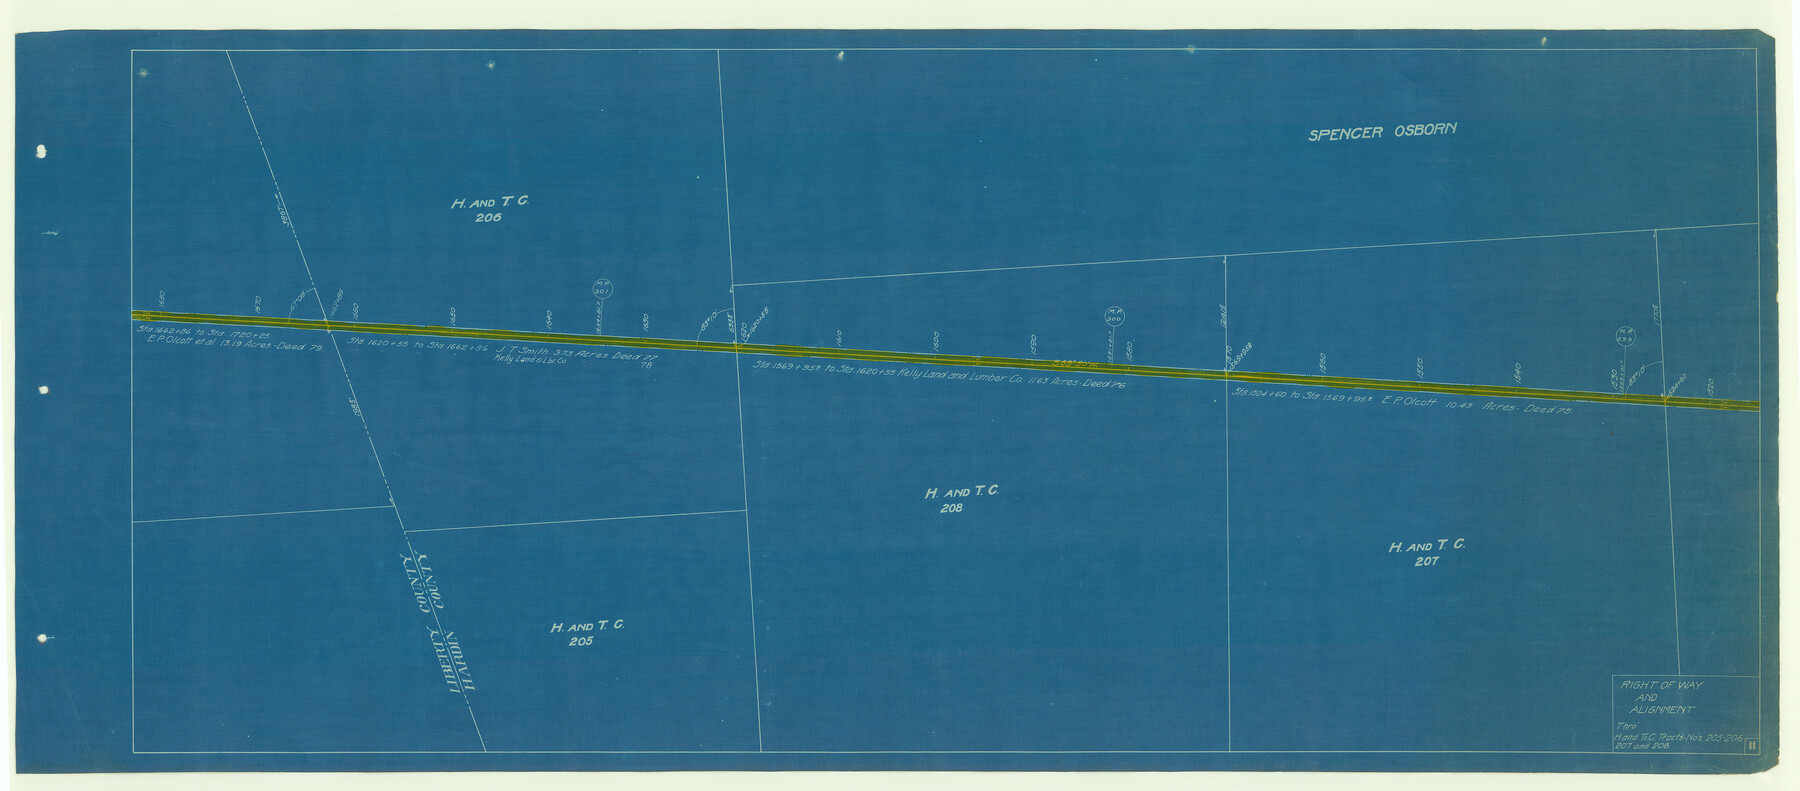 64116, [Beaumont, Sour Lake and Western Ry. Right of Way and Alignment - Frisco], General Map Collection